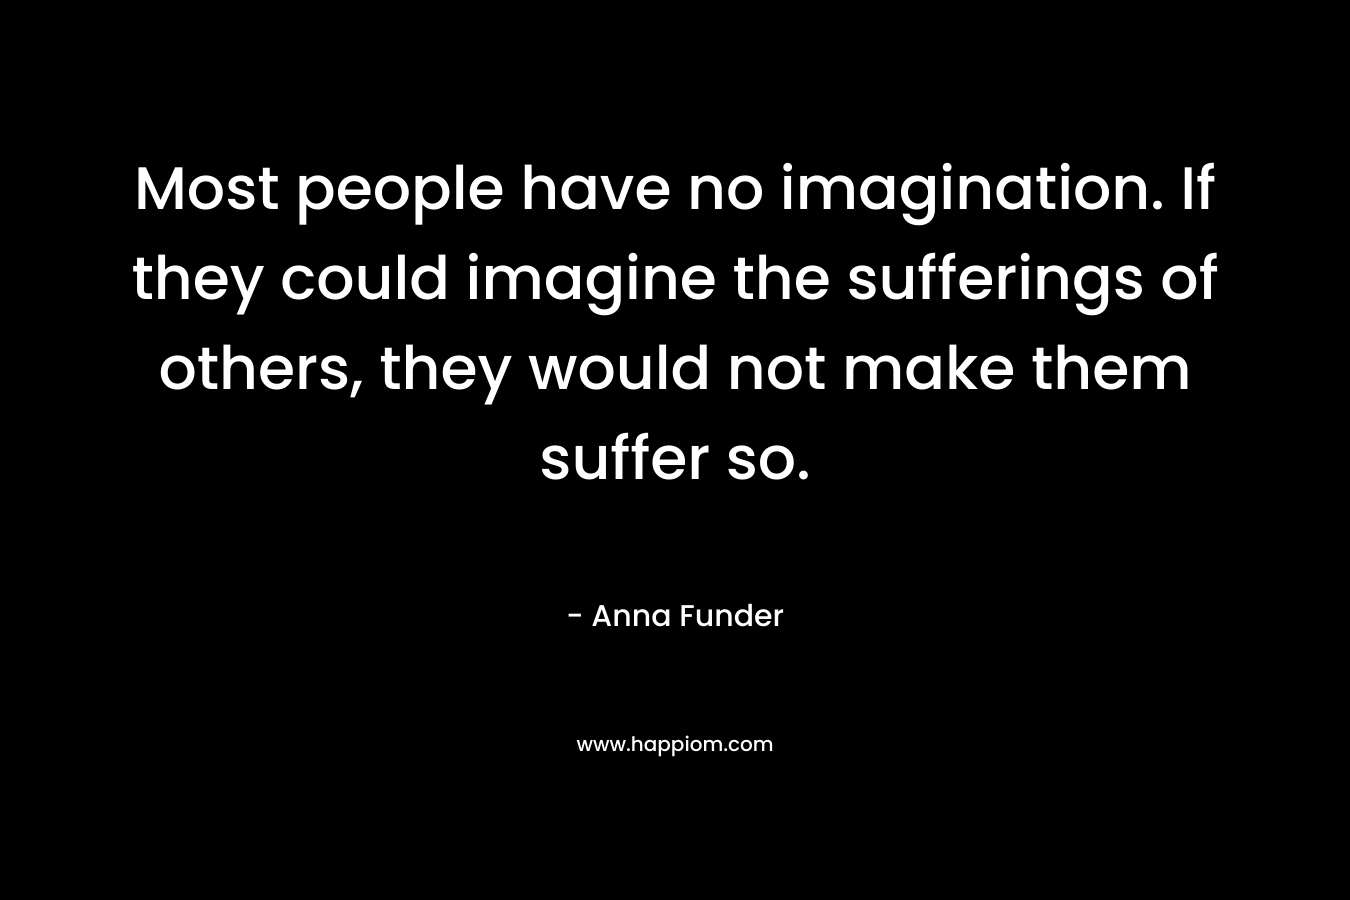 Most people have no imagination. If they could imagine the sufferings of others, they would not make them suffer so.